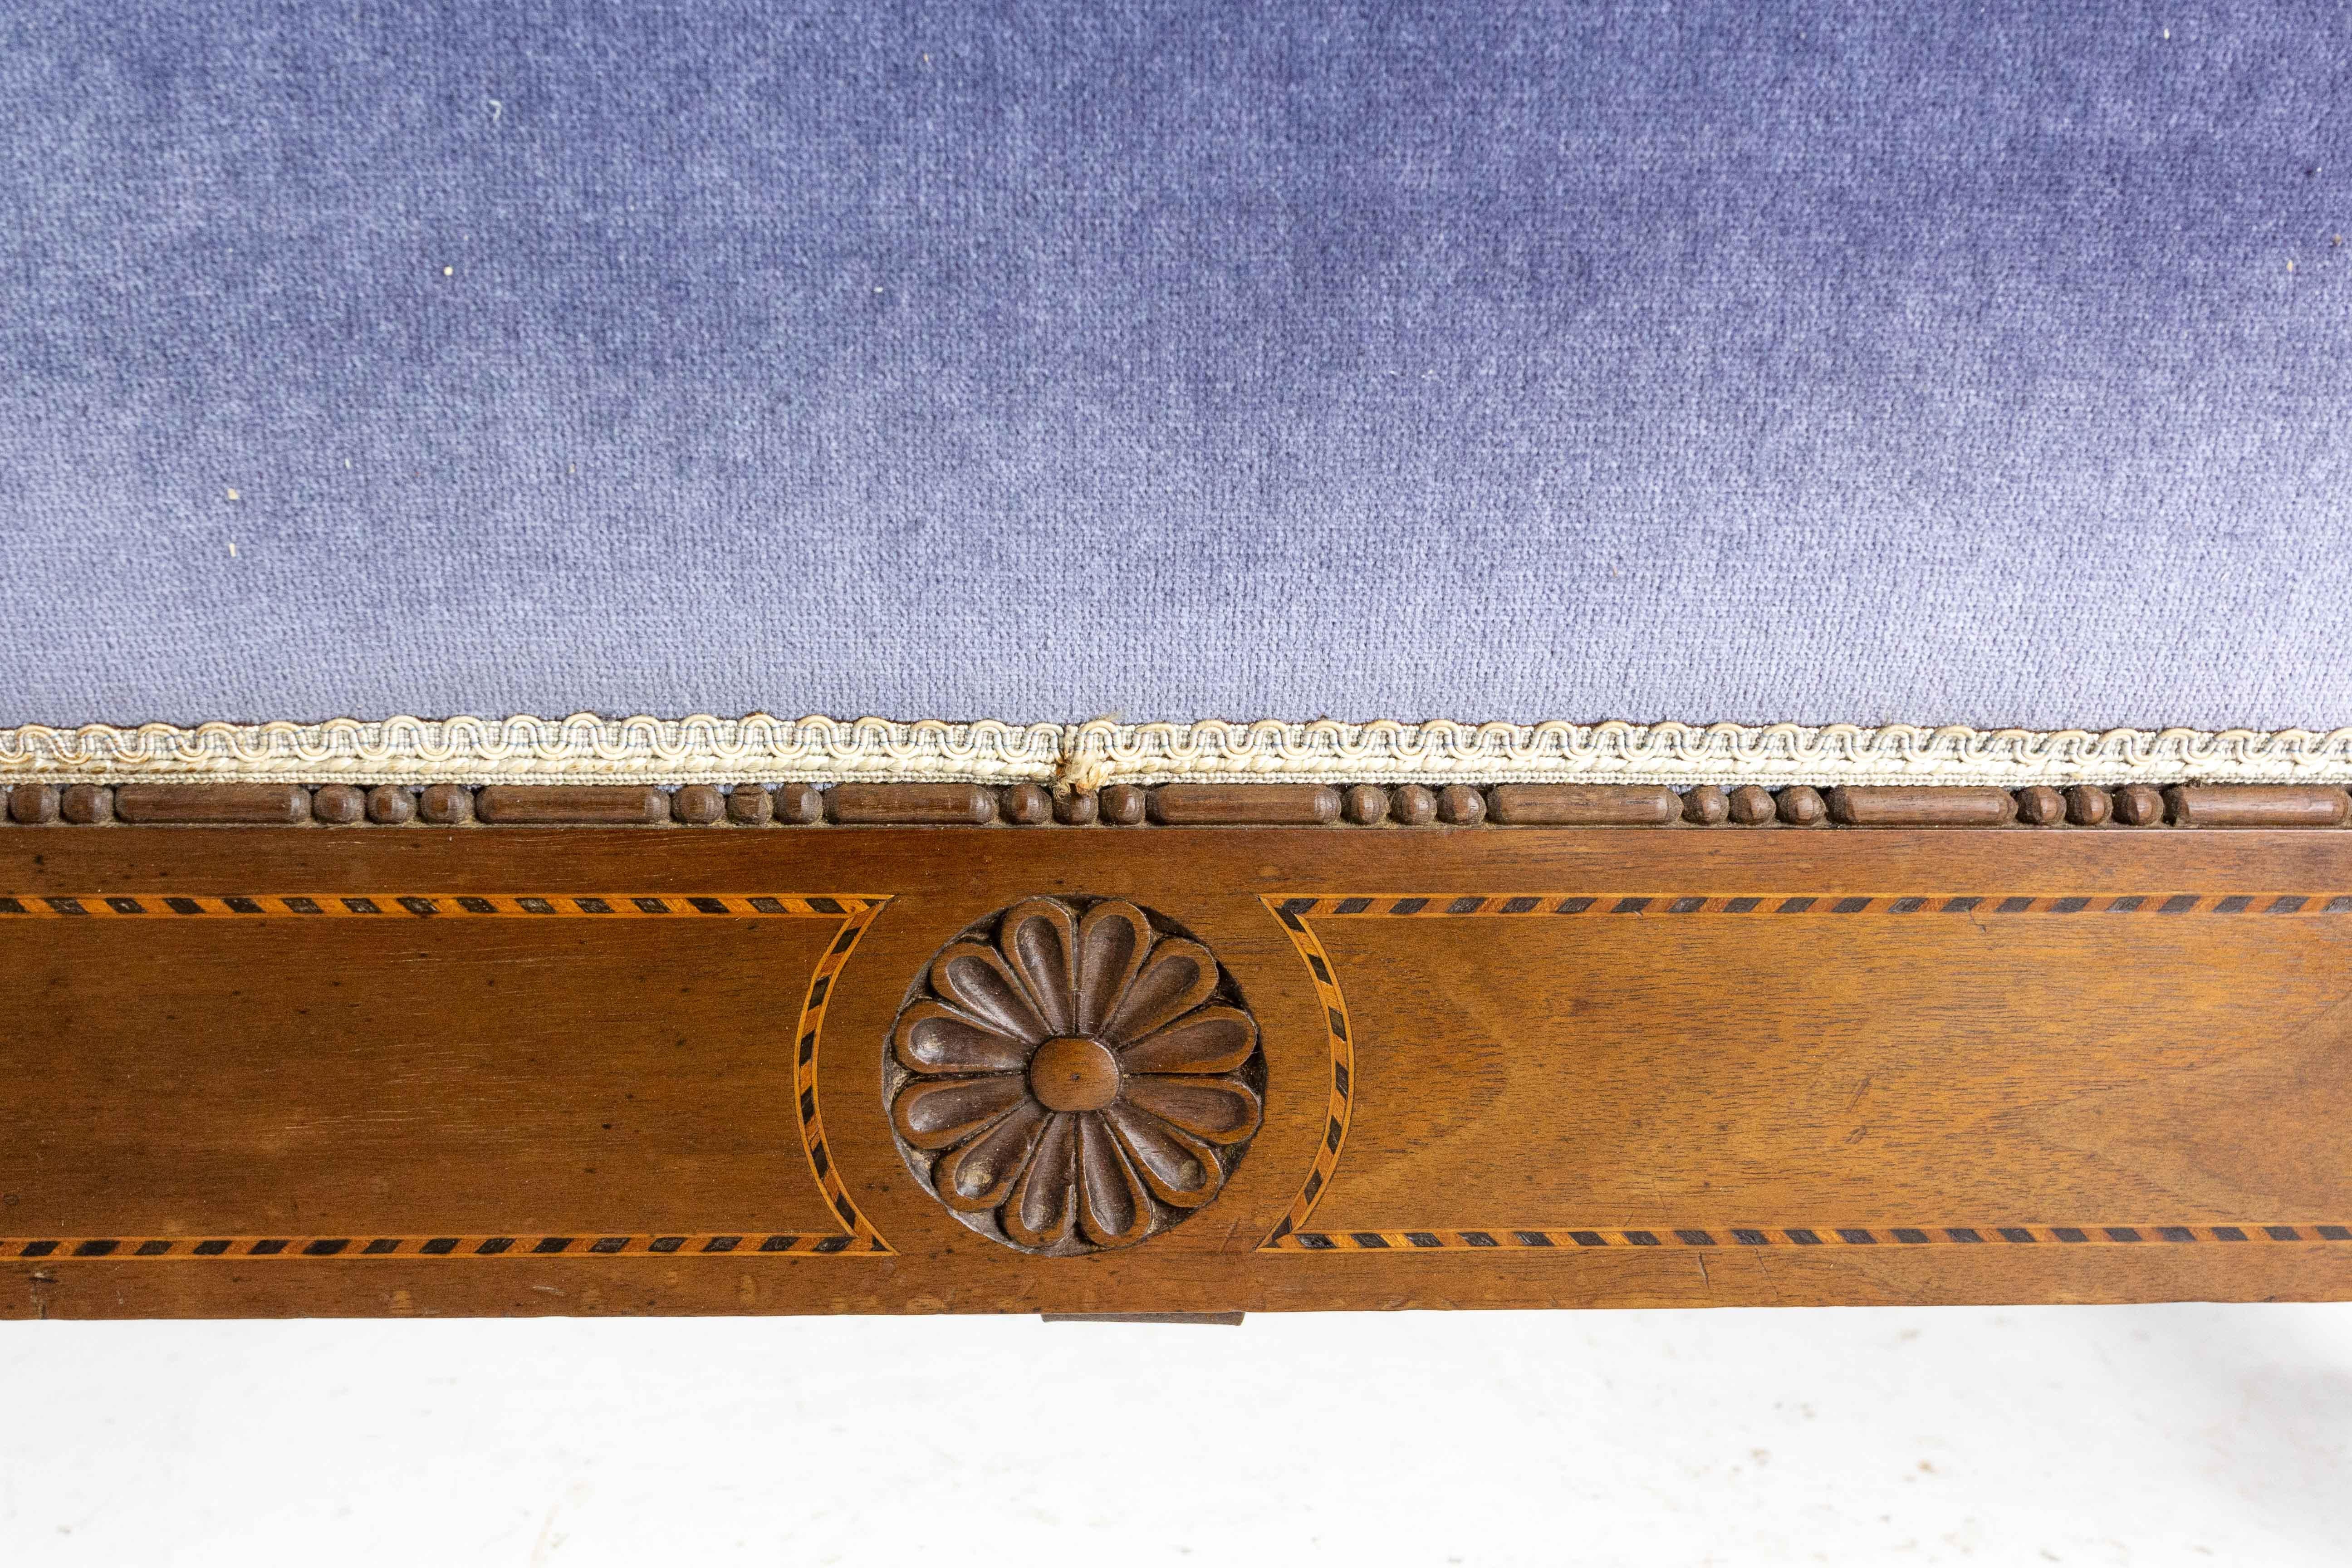 French Directoire walnut Sofa Banquette Carved and Inlayed, Early 19th Century For Sale 4